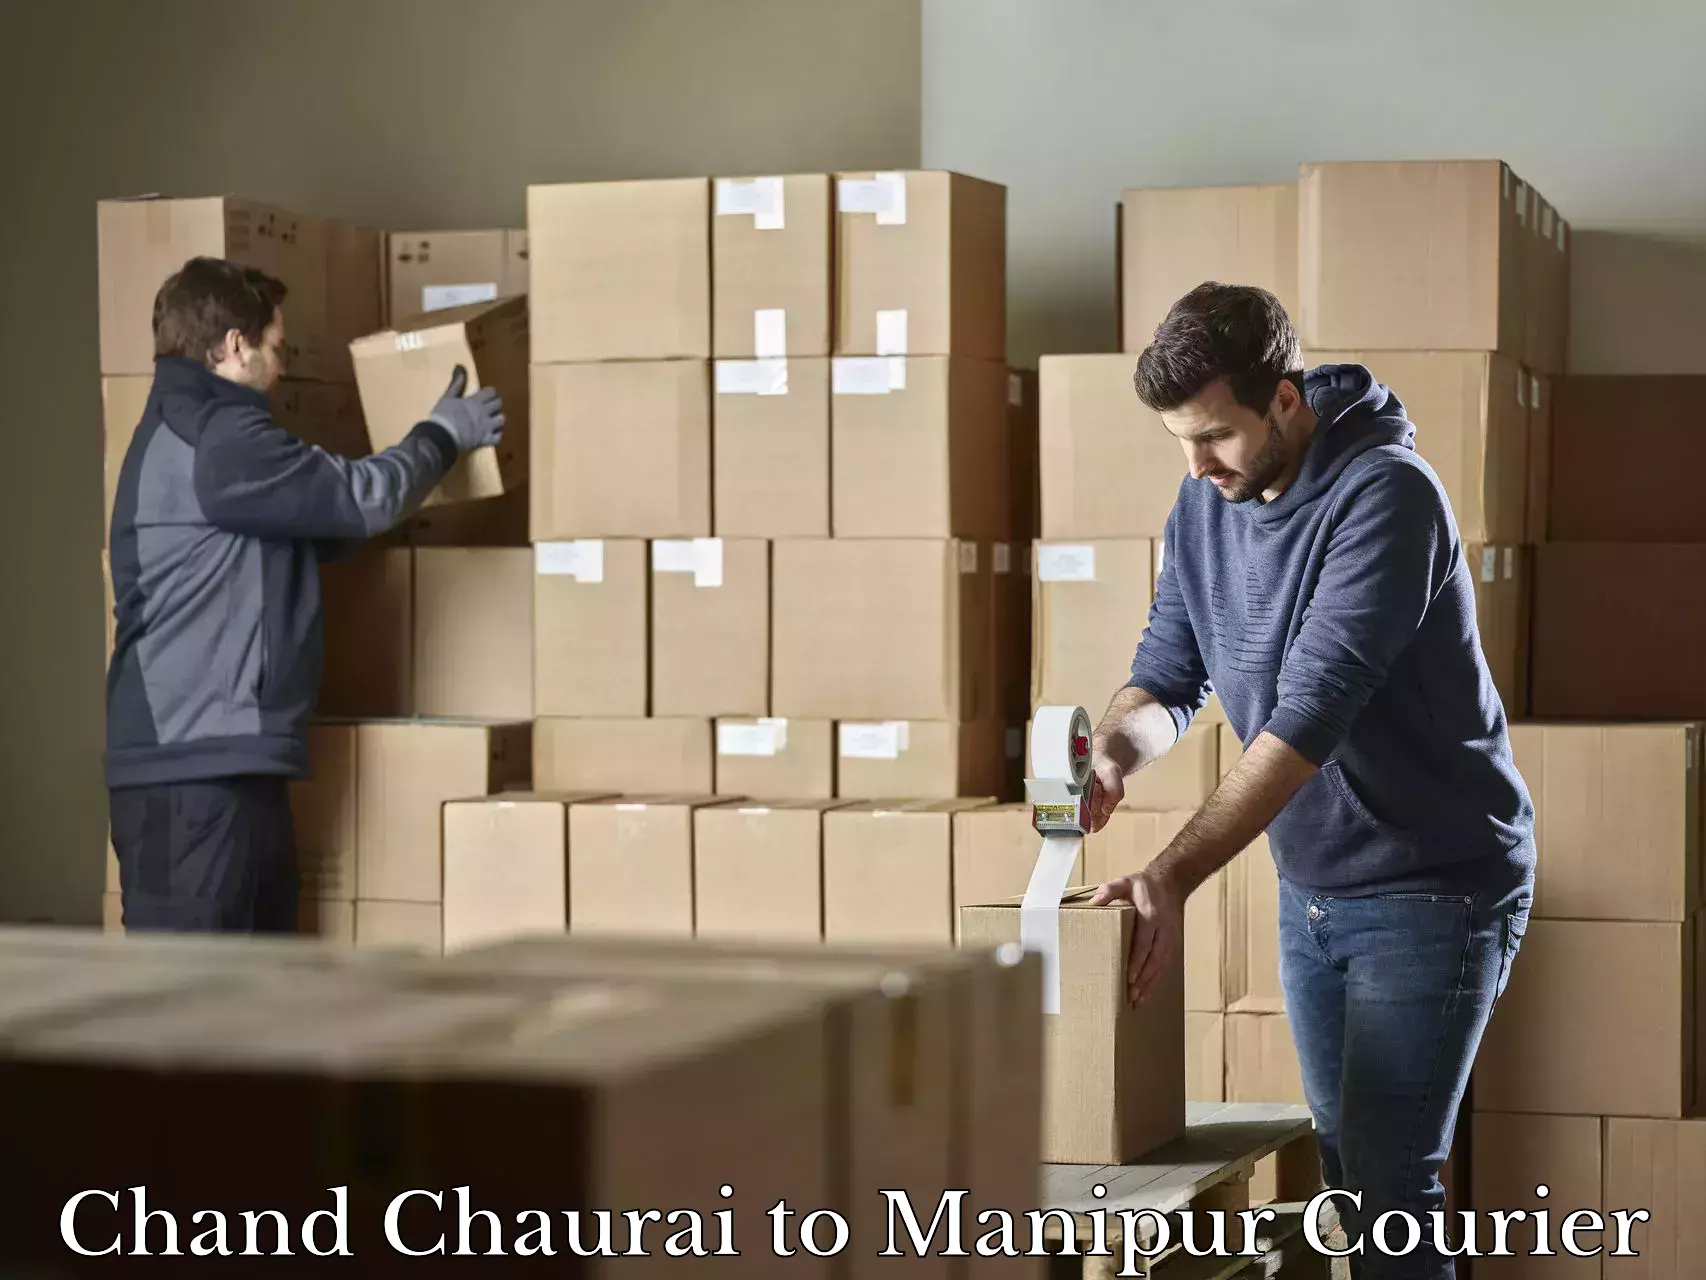 Luggage shipment specialists Chand Chaurai to Manipur